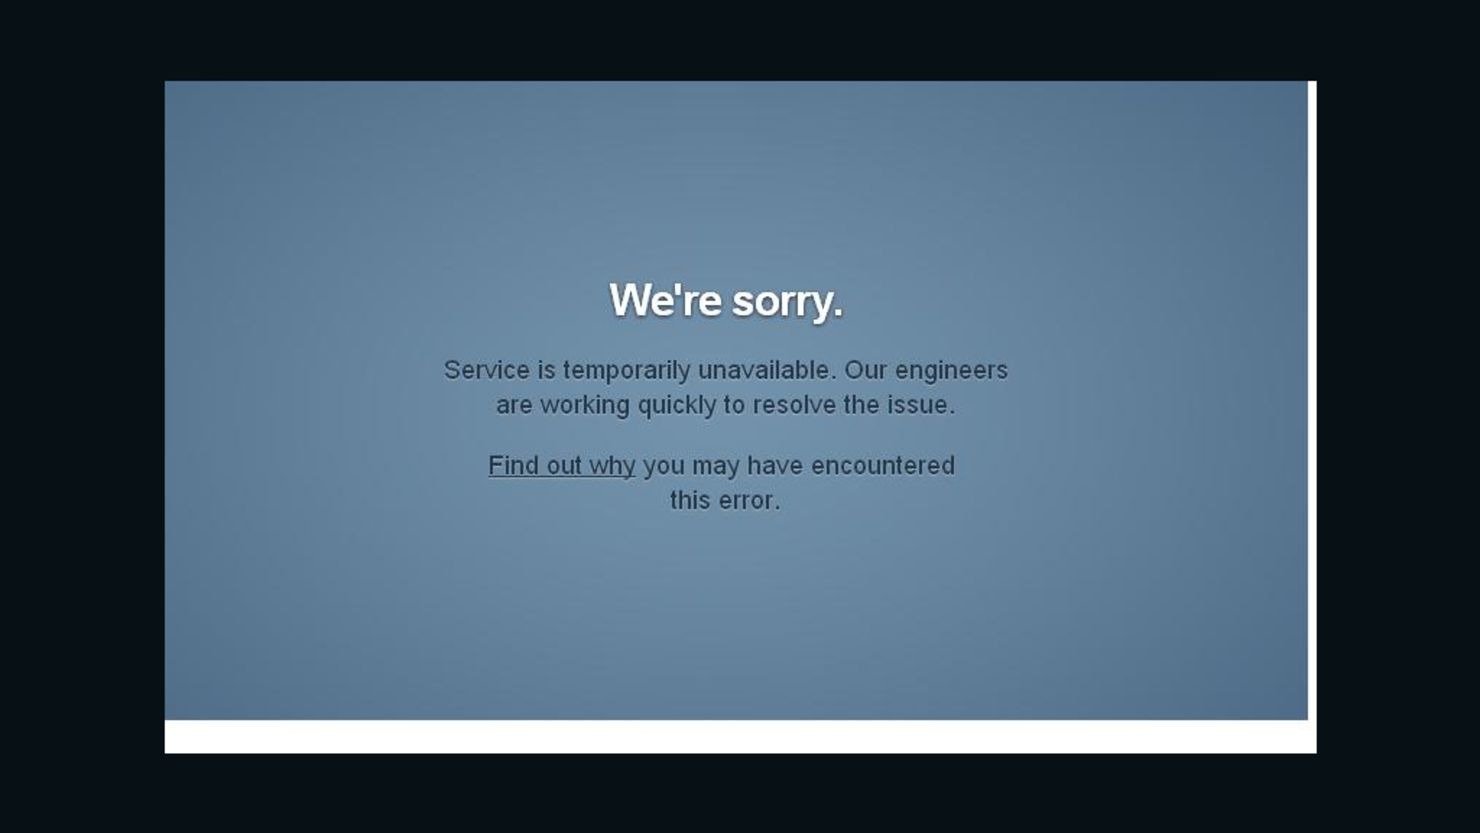 Popular blogging site Tumblr was down for many users Friday, experiencing "slow loading or intermittent errors."